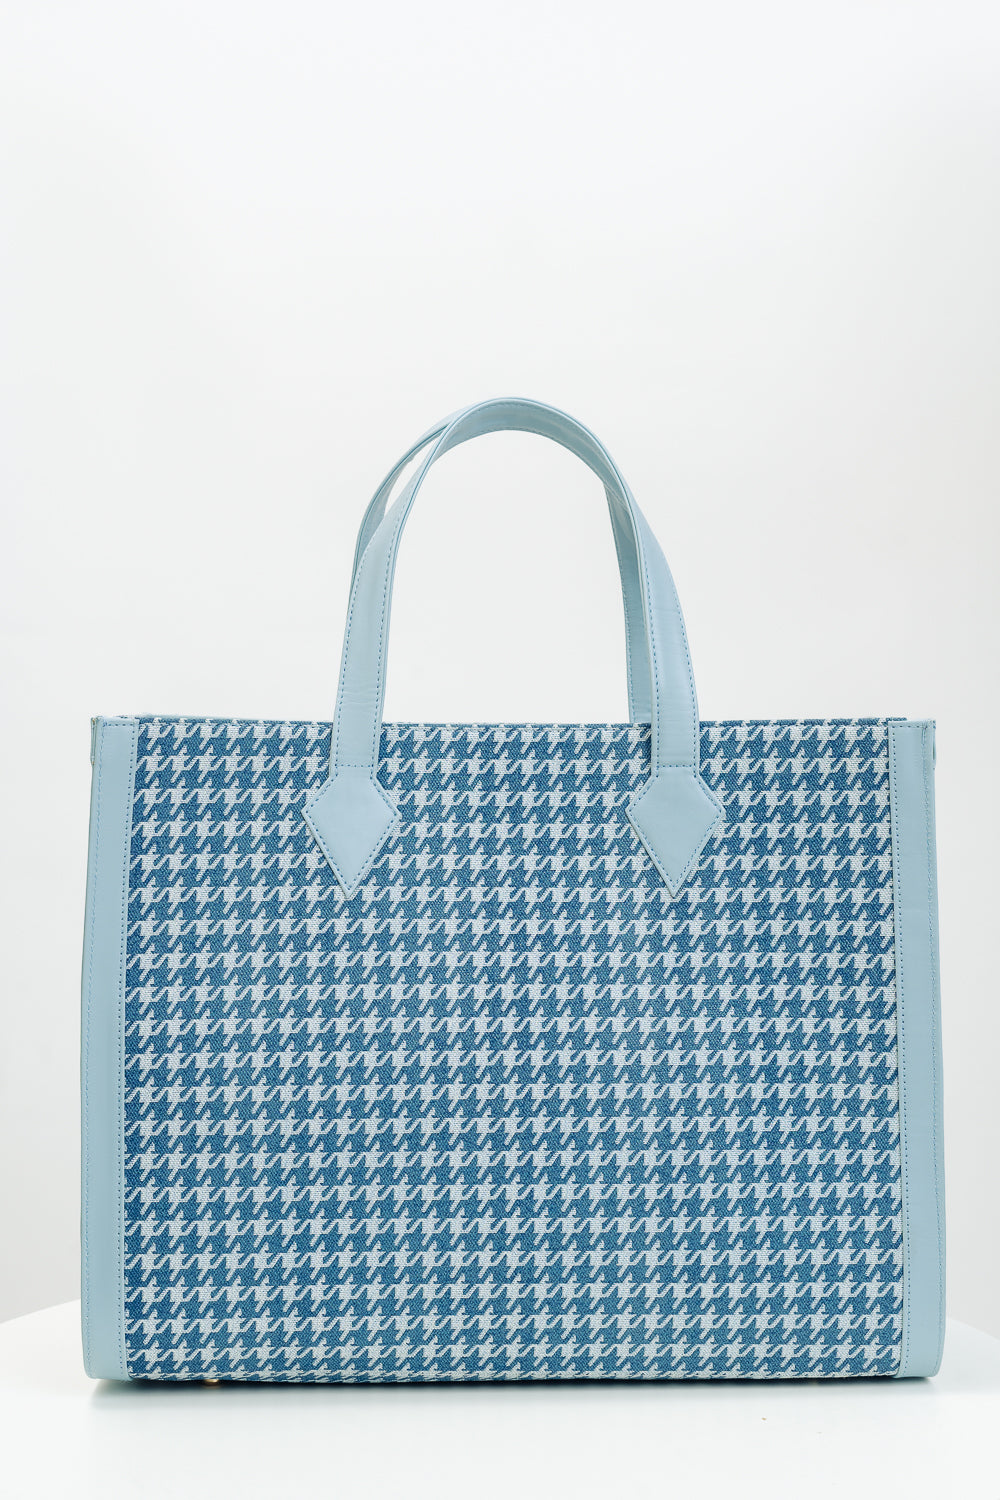 The Blue Tote Bag